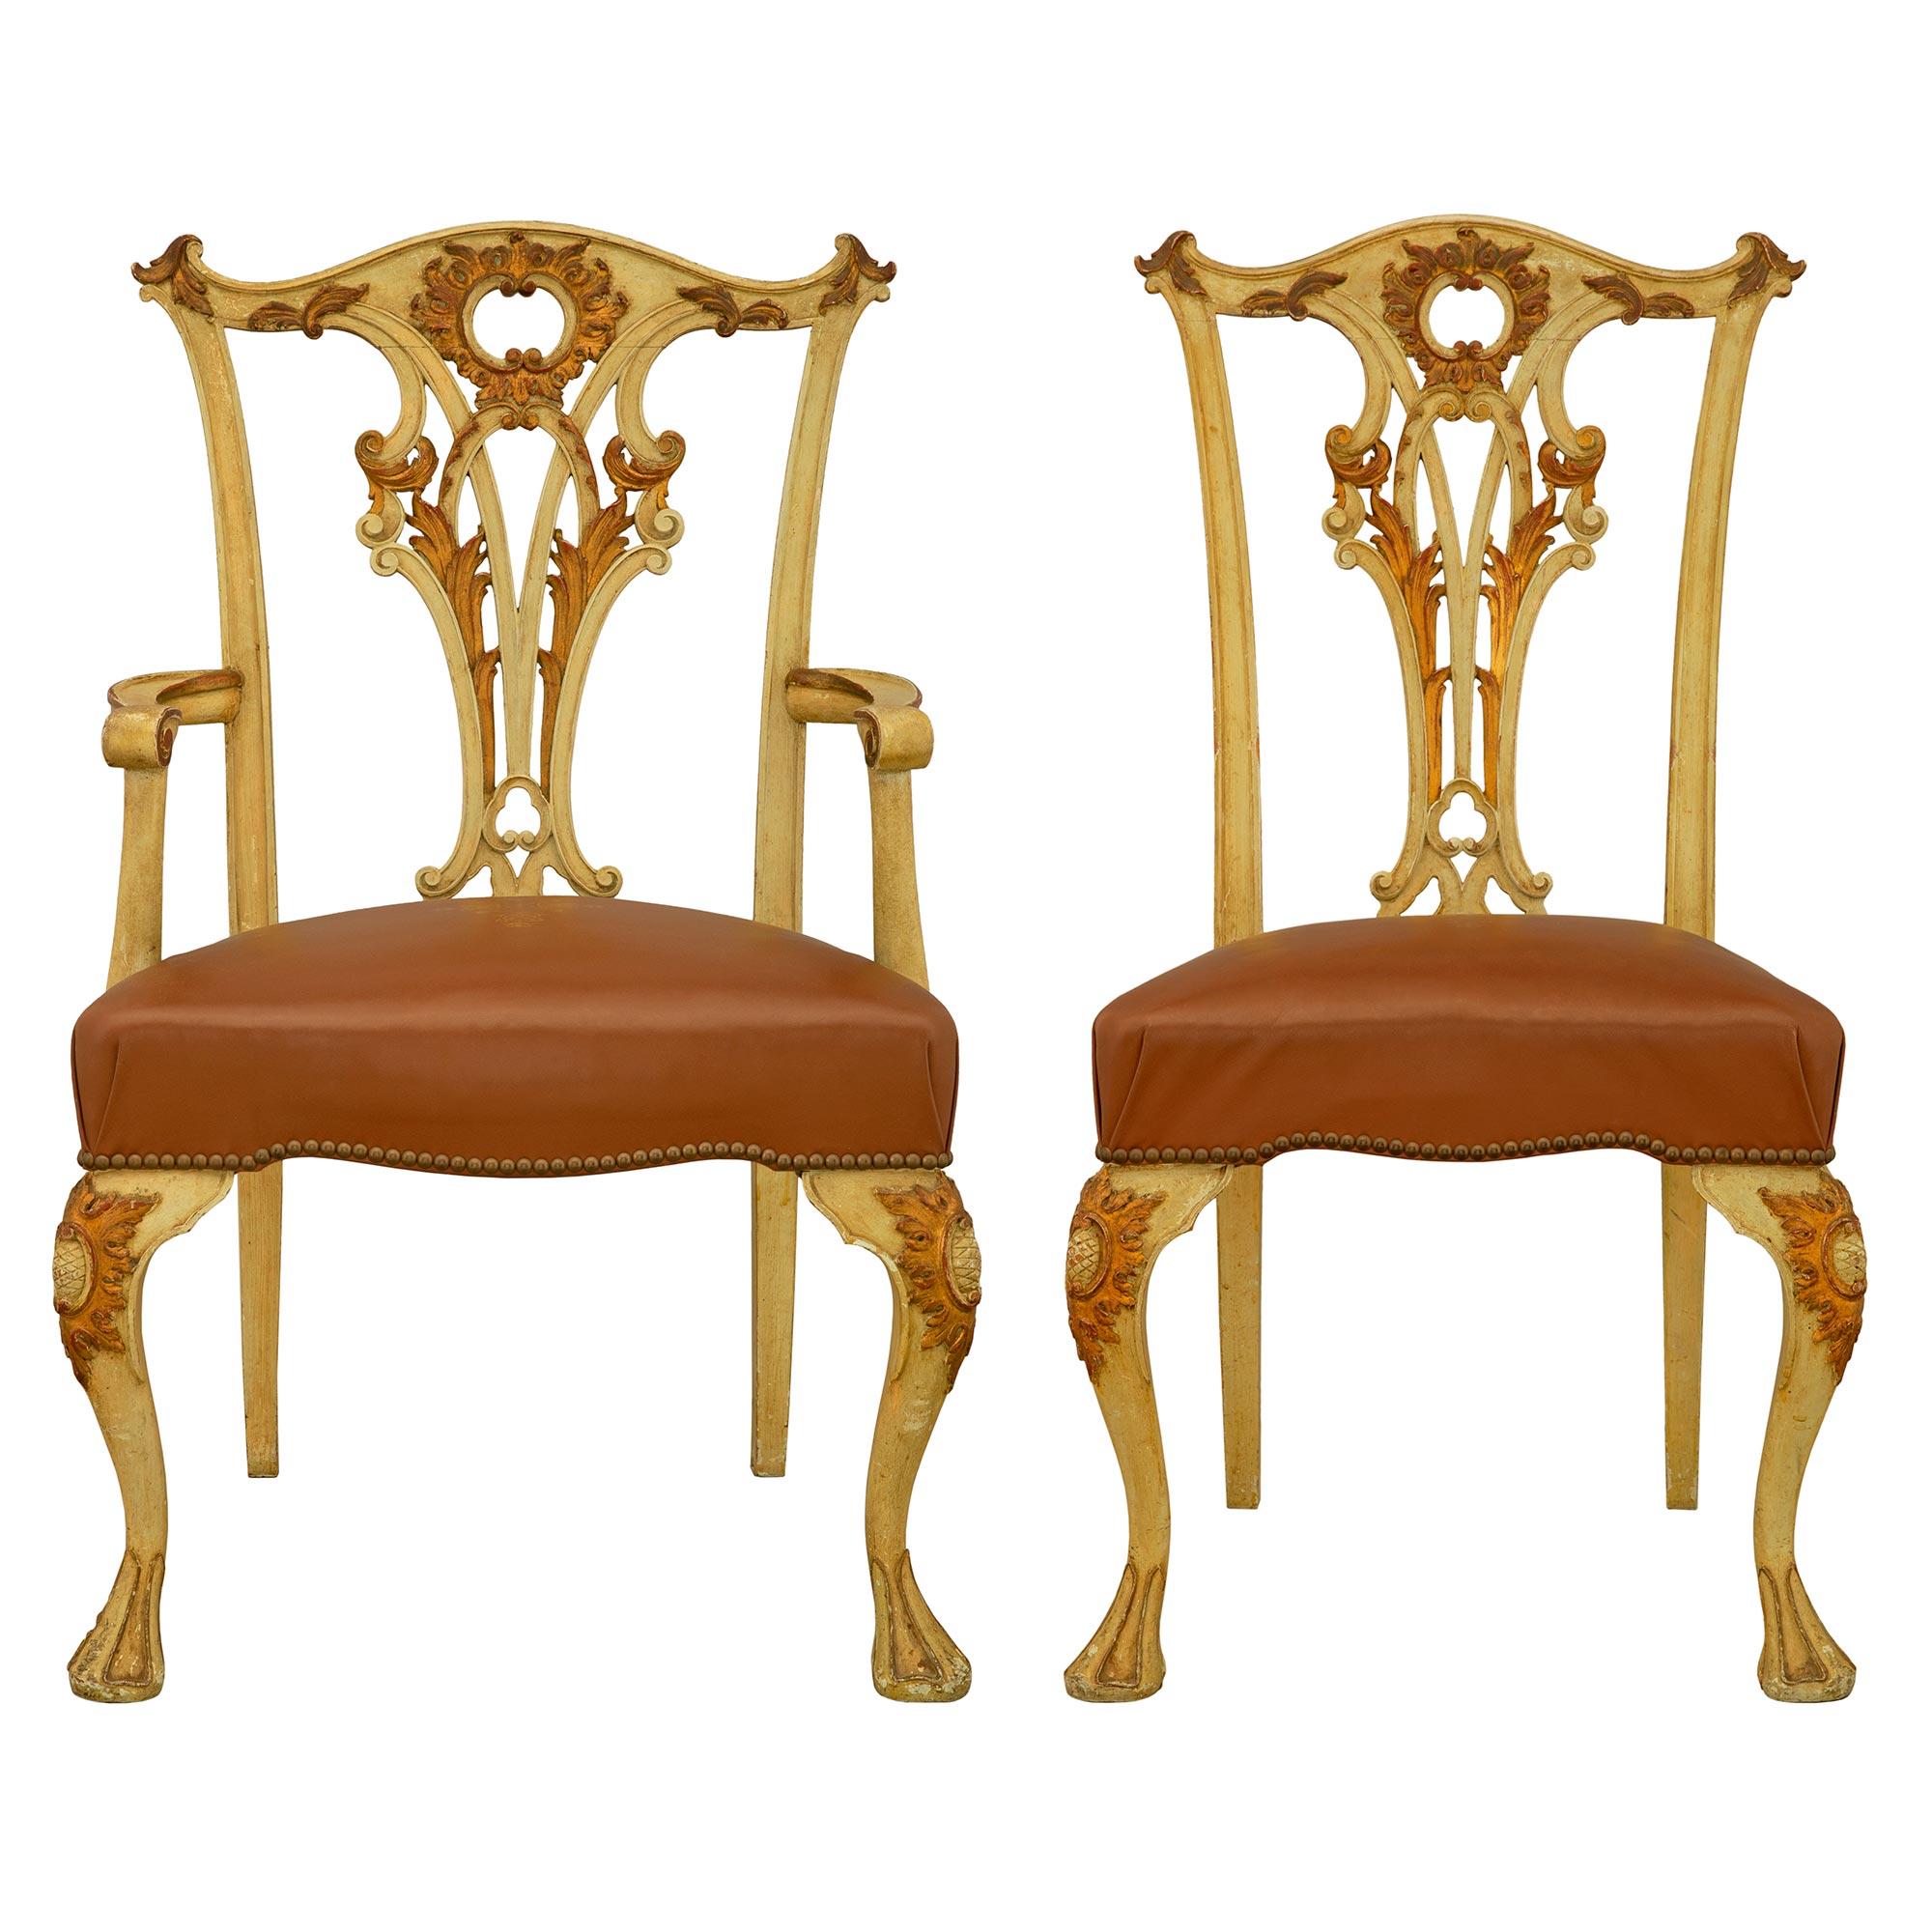 A very attractive late 19th century Italian complete set of six side and two armchairs. The Chippendale st cream color patinated and gilt chairs are richly carved on the cabriole legs and the pierced back with scrolls and acanthus leaves. The